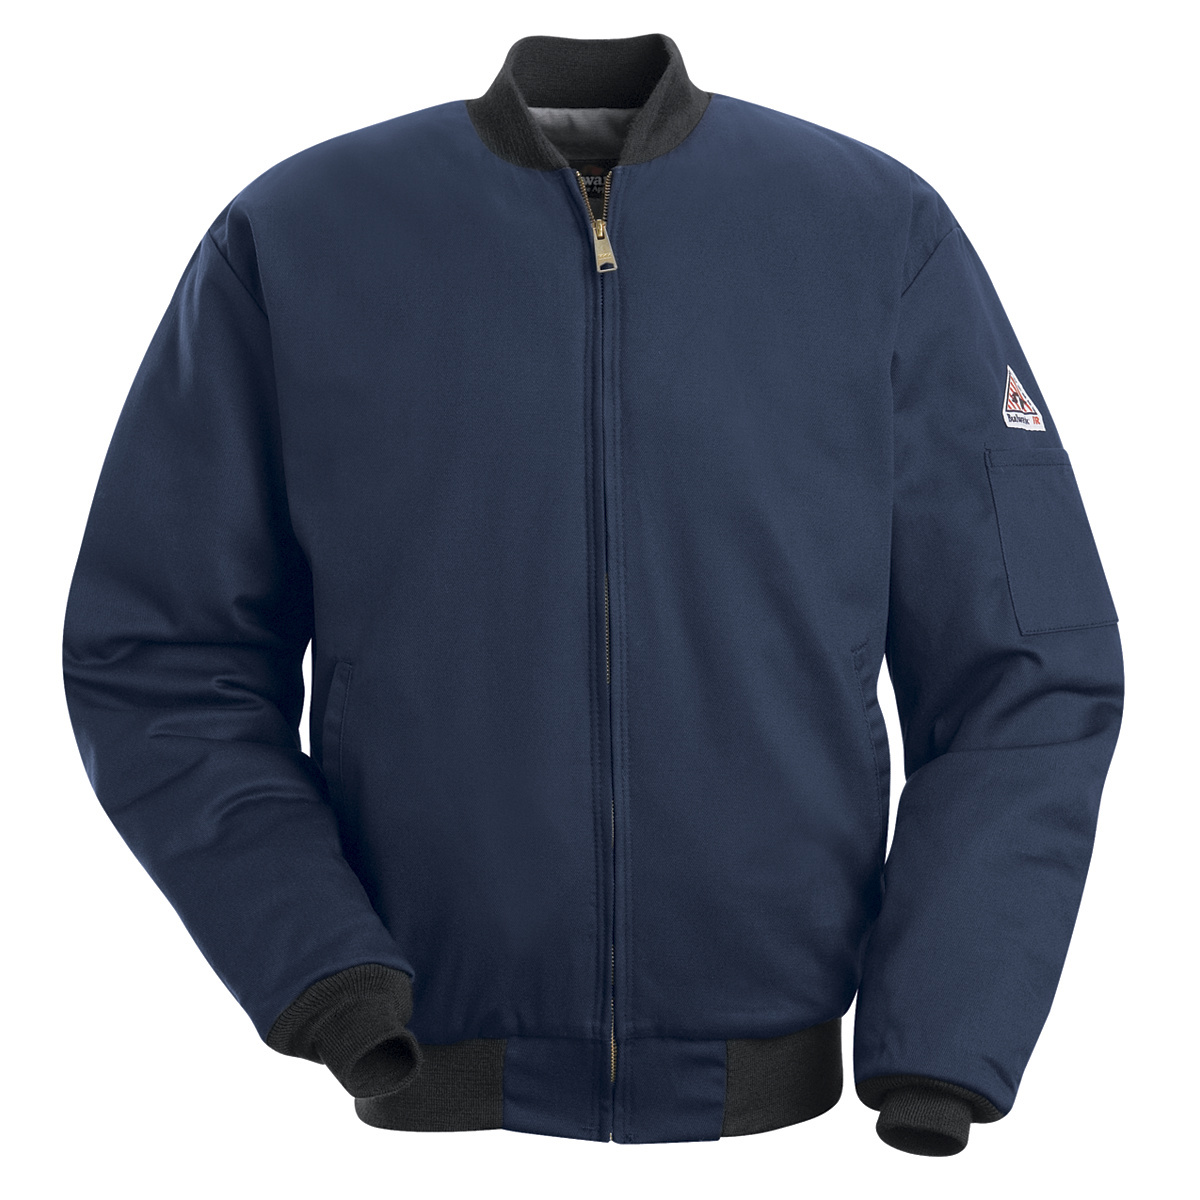 Bulwark® X-Large Tall Navy Blue EXCEL FR® Twill Cotton Water Repellent Flame Resistant Jacket With Cotton Lining And Zipper Fron